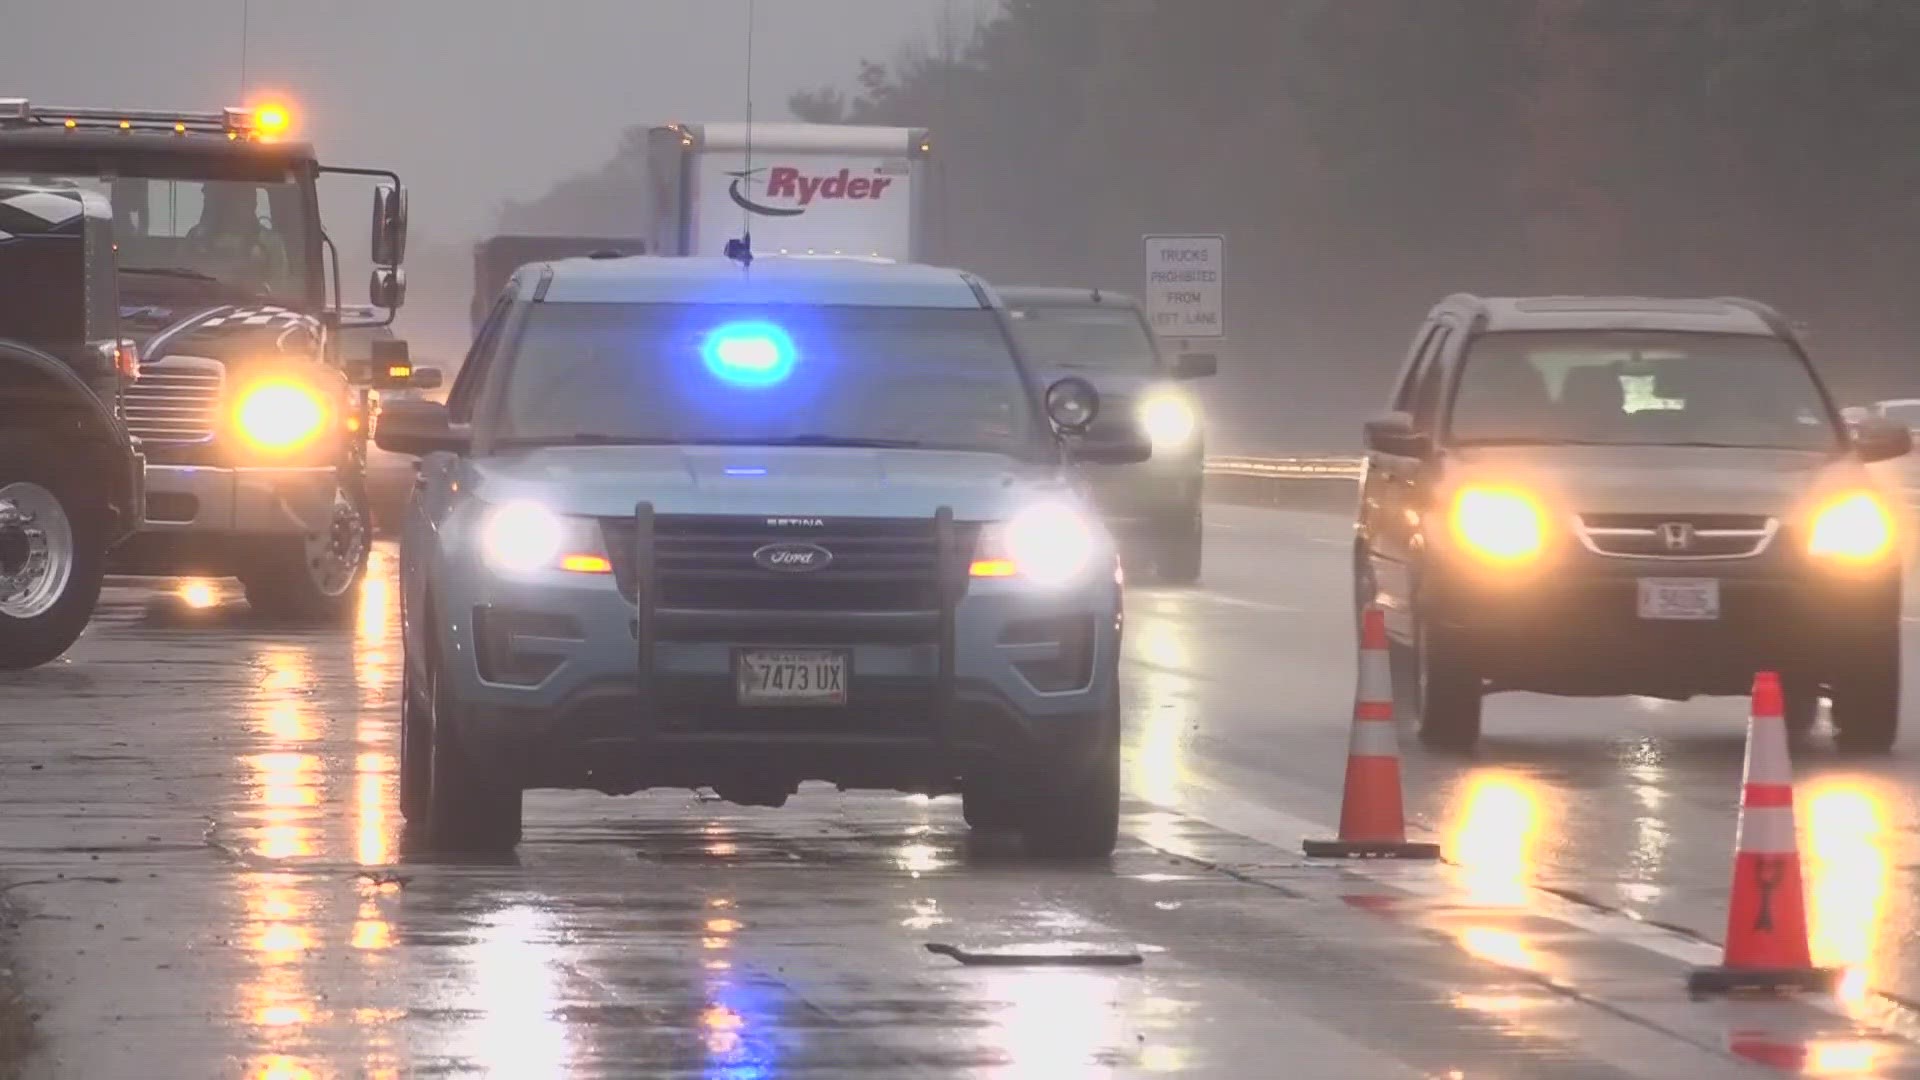 Crashes and fatalities spike around Memorial Day weekend, prompting Maine leaders to urge caution for drivers who will be traveling during that time.